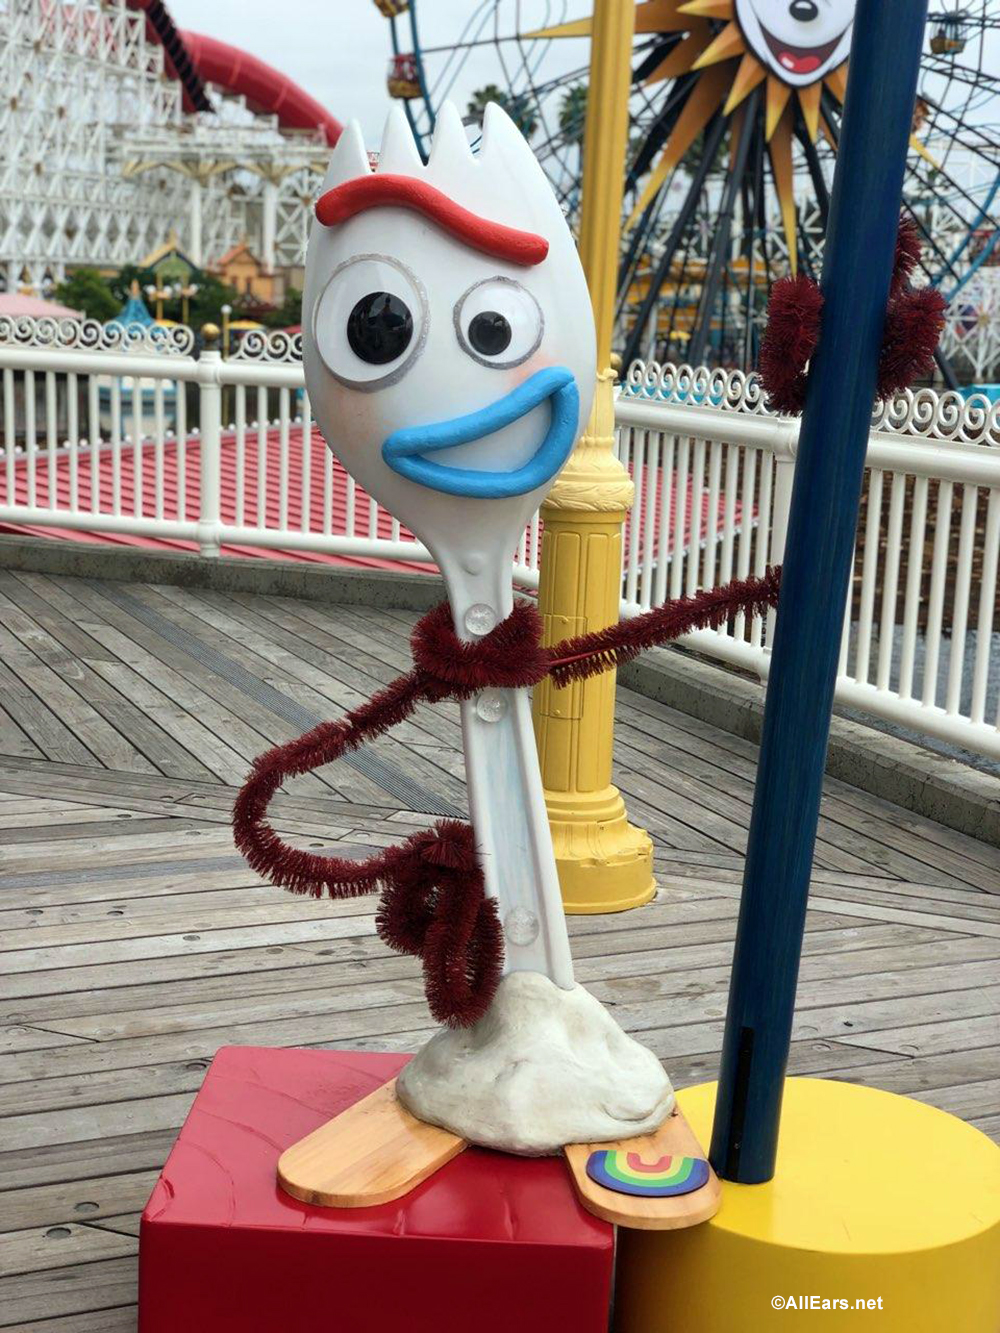 Toy Story 4' Teaser: Who Is Forky and Is He Going to Make Us Cry?